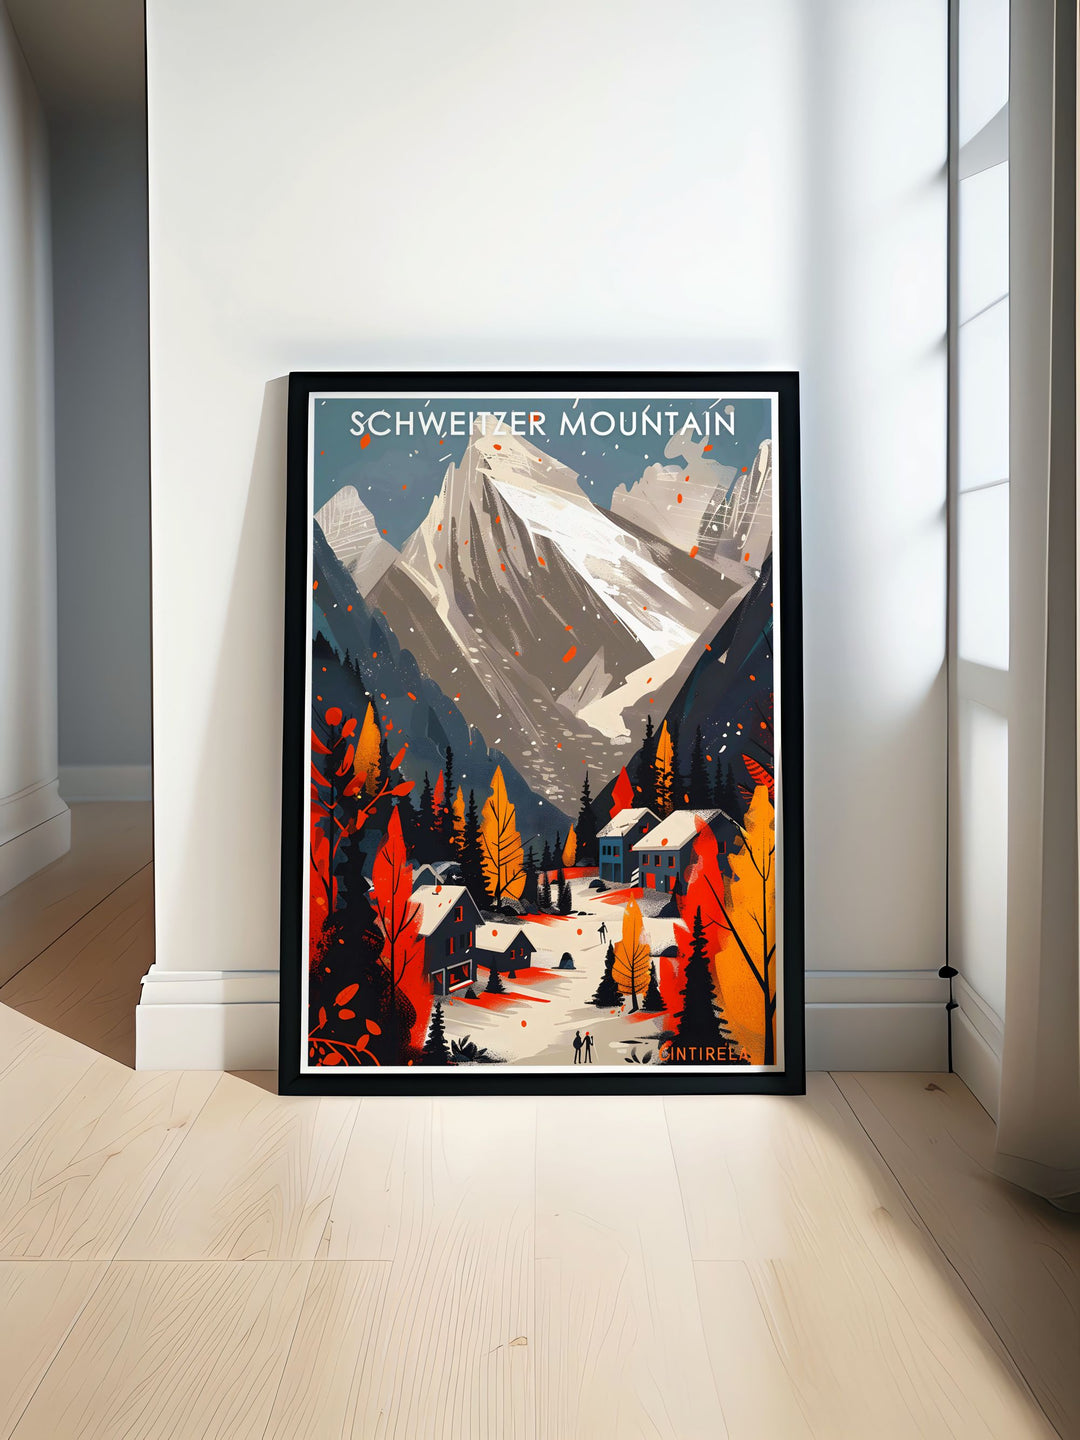 This vintage ski poster showcases the serene beauty of Lake Pend Oreille, visible from the slopes of Schweitzer Mountain. Perfect for adding a touch of tranquility to any room.